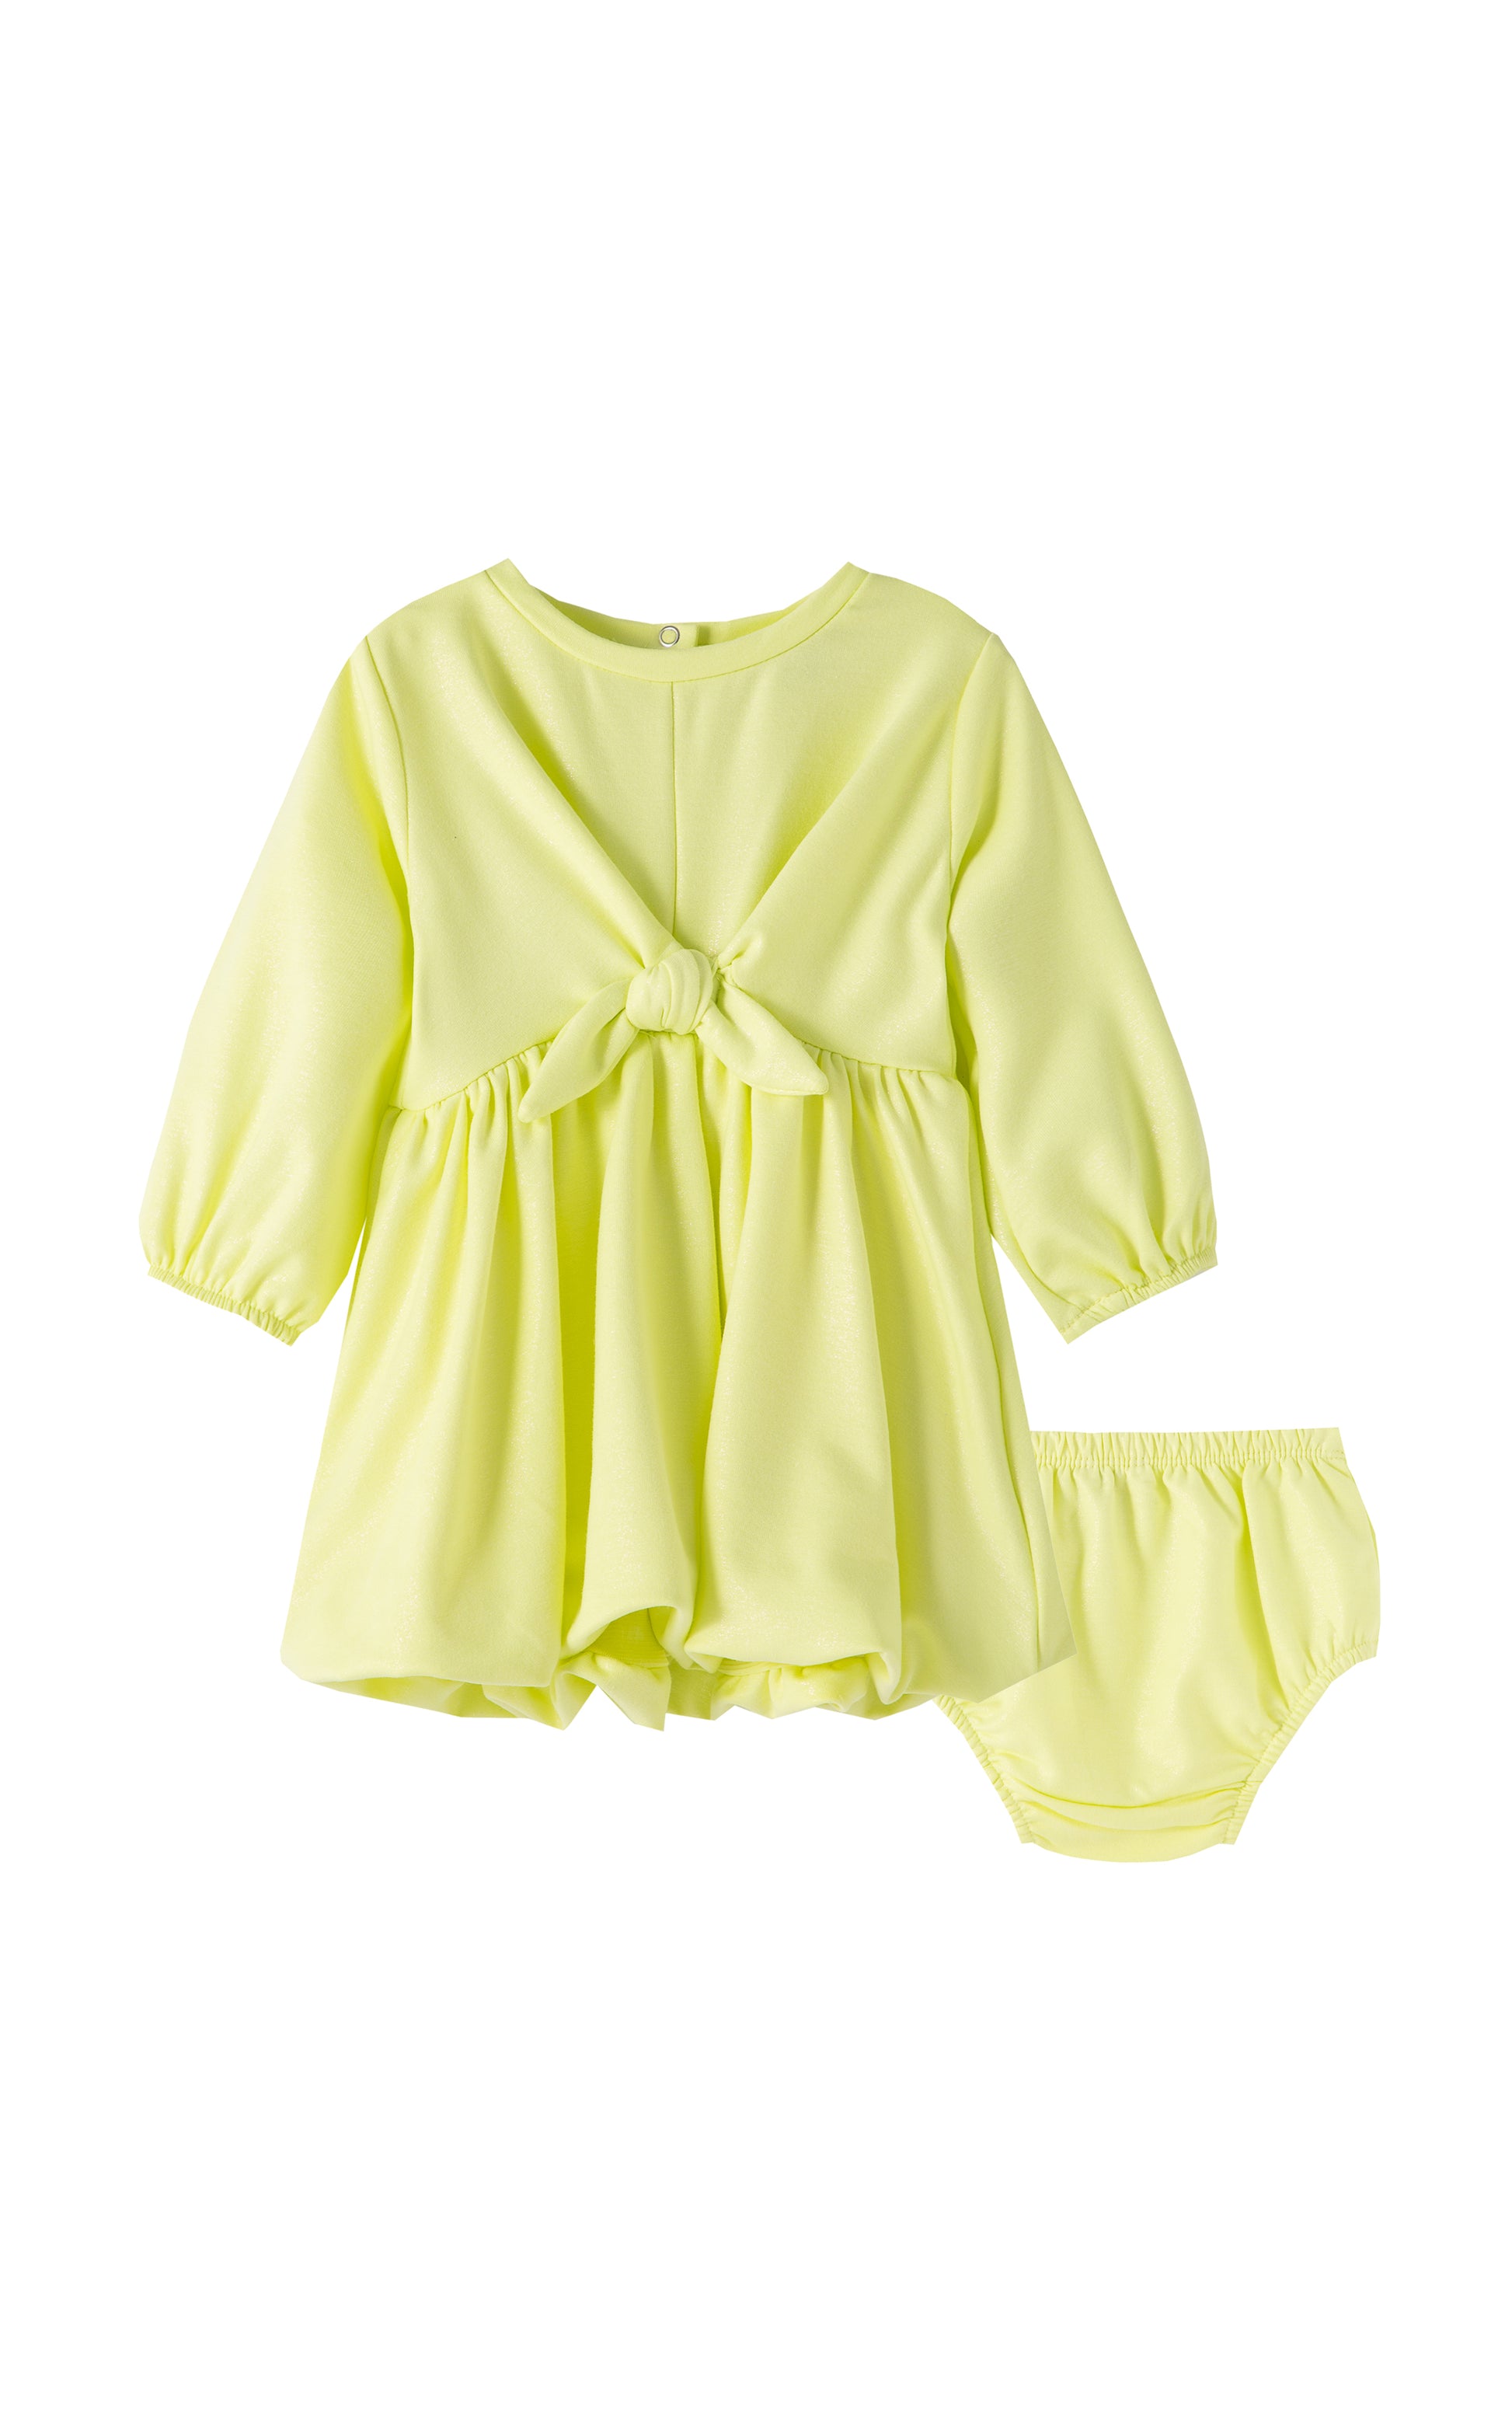 METALLIC LIME GREEN BUBBLE DRESS WITH BOW AND MATCHING BLOOMERS